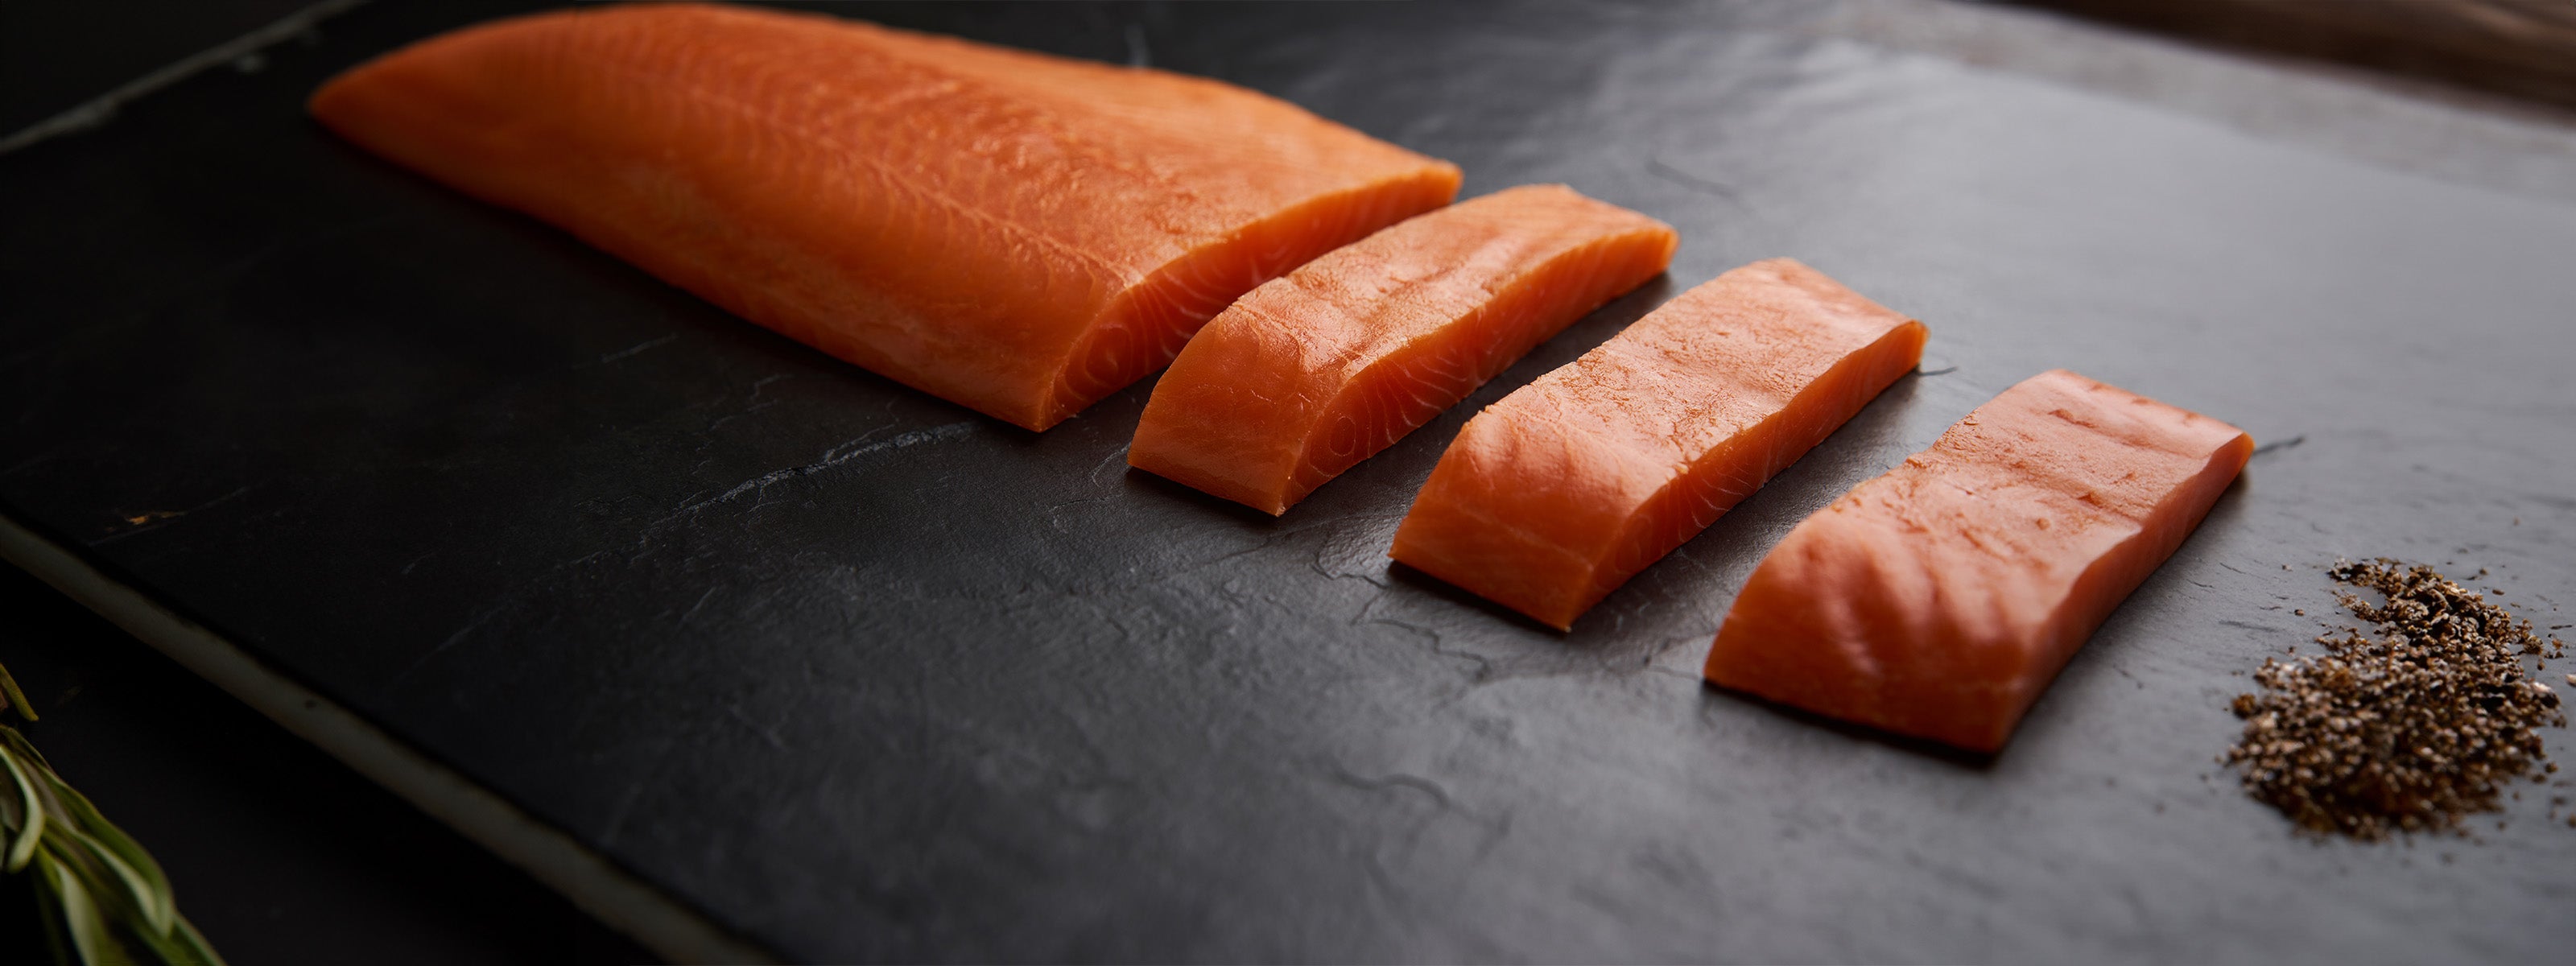 Salmon portions from Bakkafrost laid out on a black plate